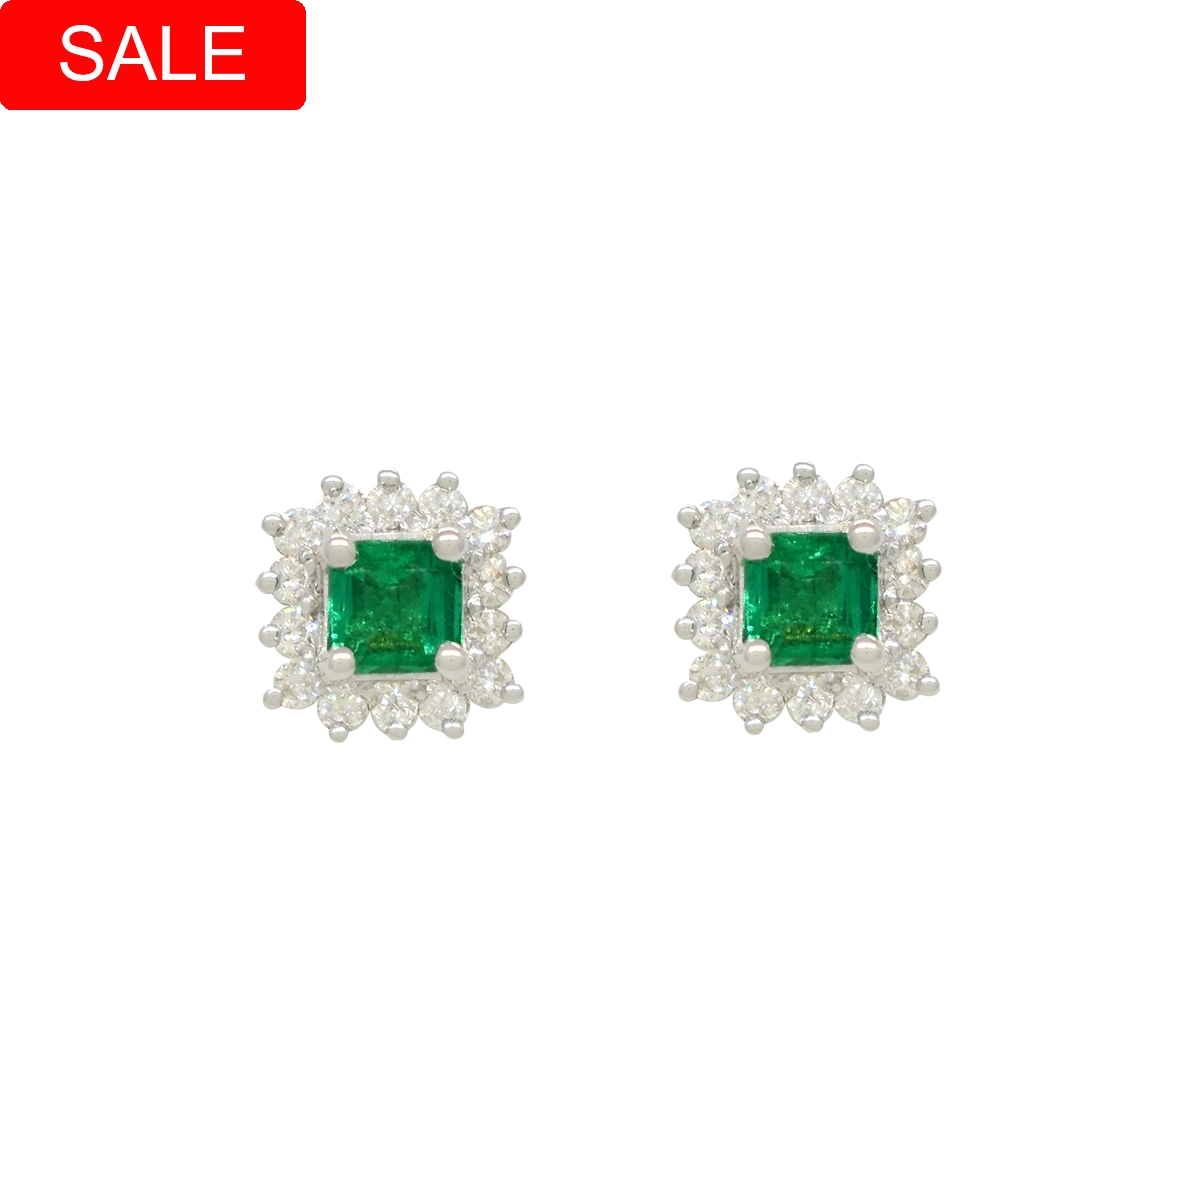 Small emerald cut emeralds surrounded by round cut diamonds set in 18K white gold stud earrings in elegant prong setting